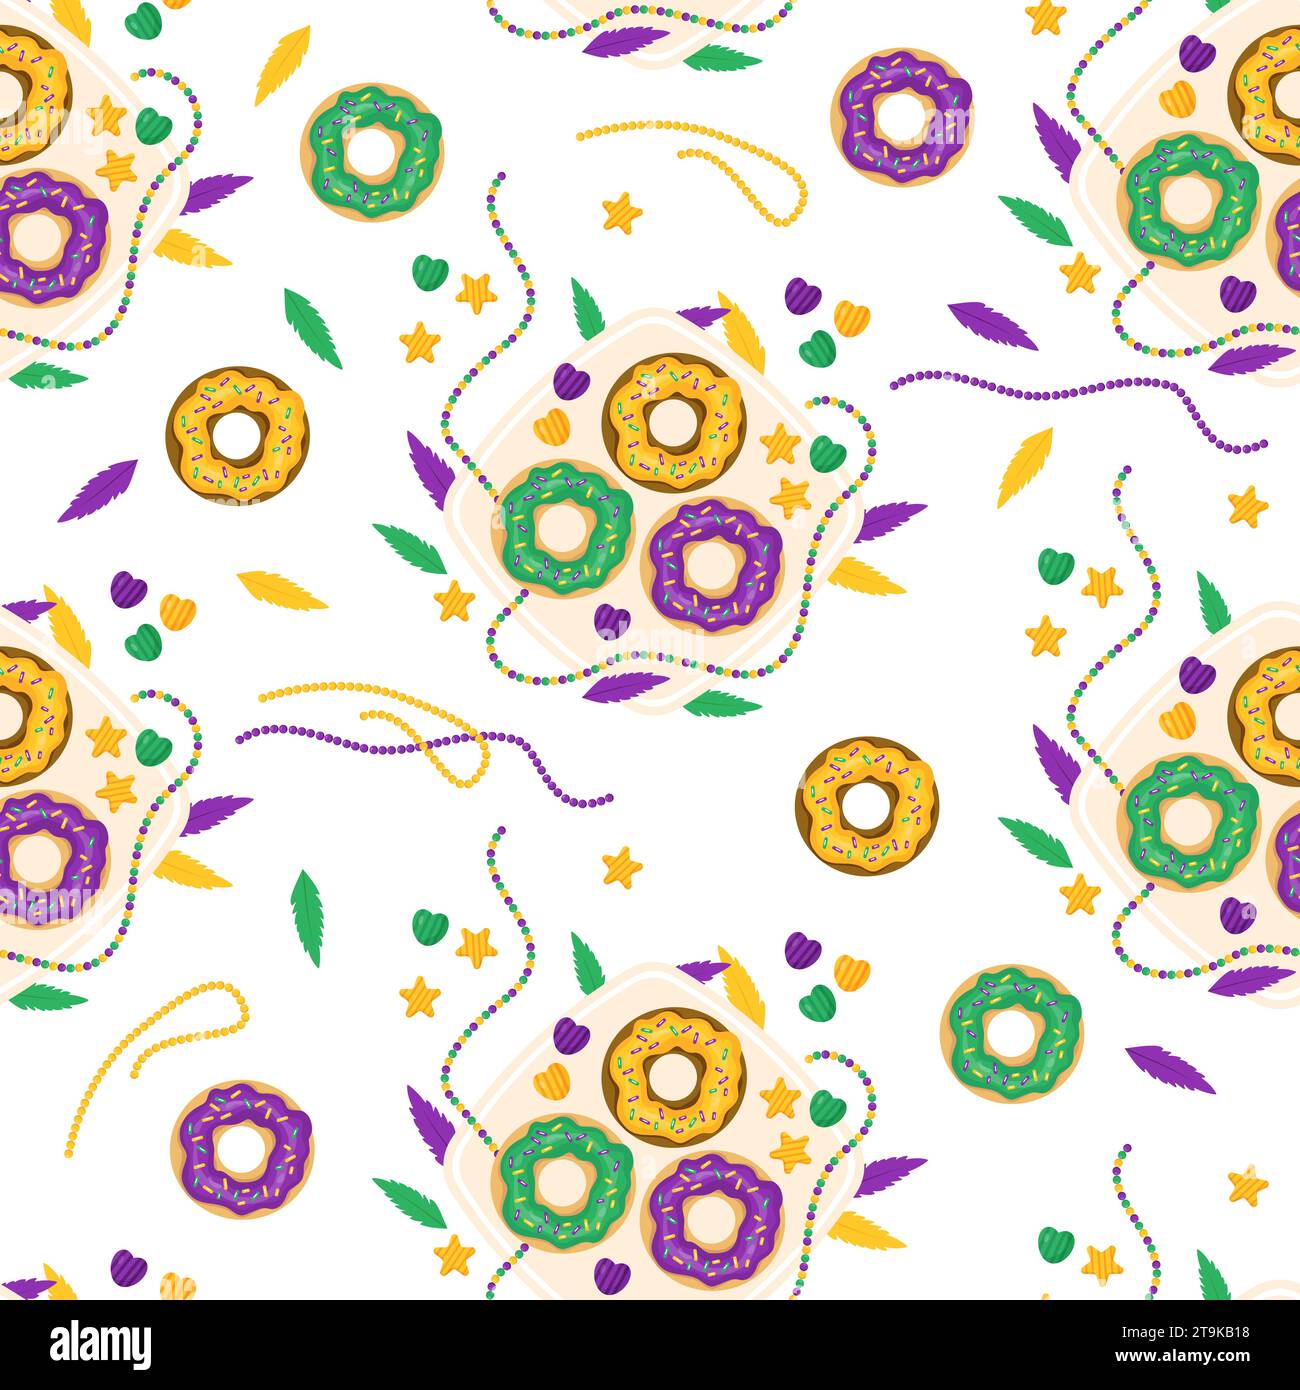 King Cake seamless pattern. Festive donuts on plate with colorful icing, beads, necklaces and feathers on white background. Mardi Gras carnival food. Stock Vector